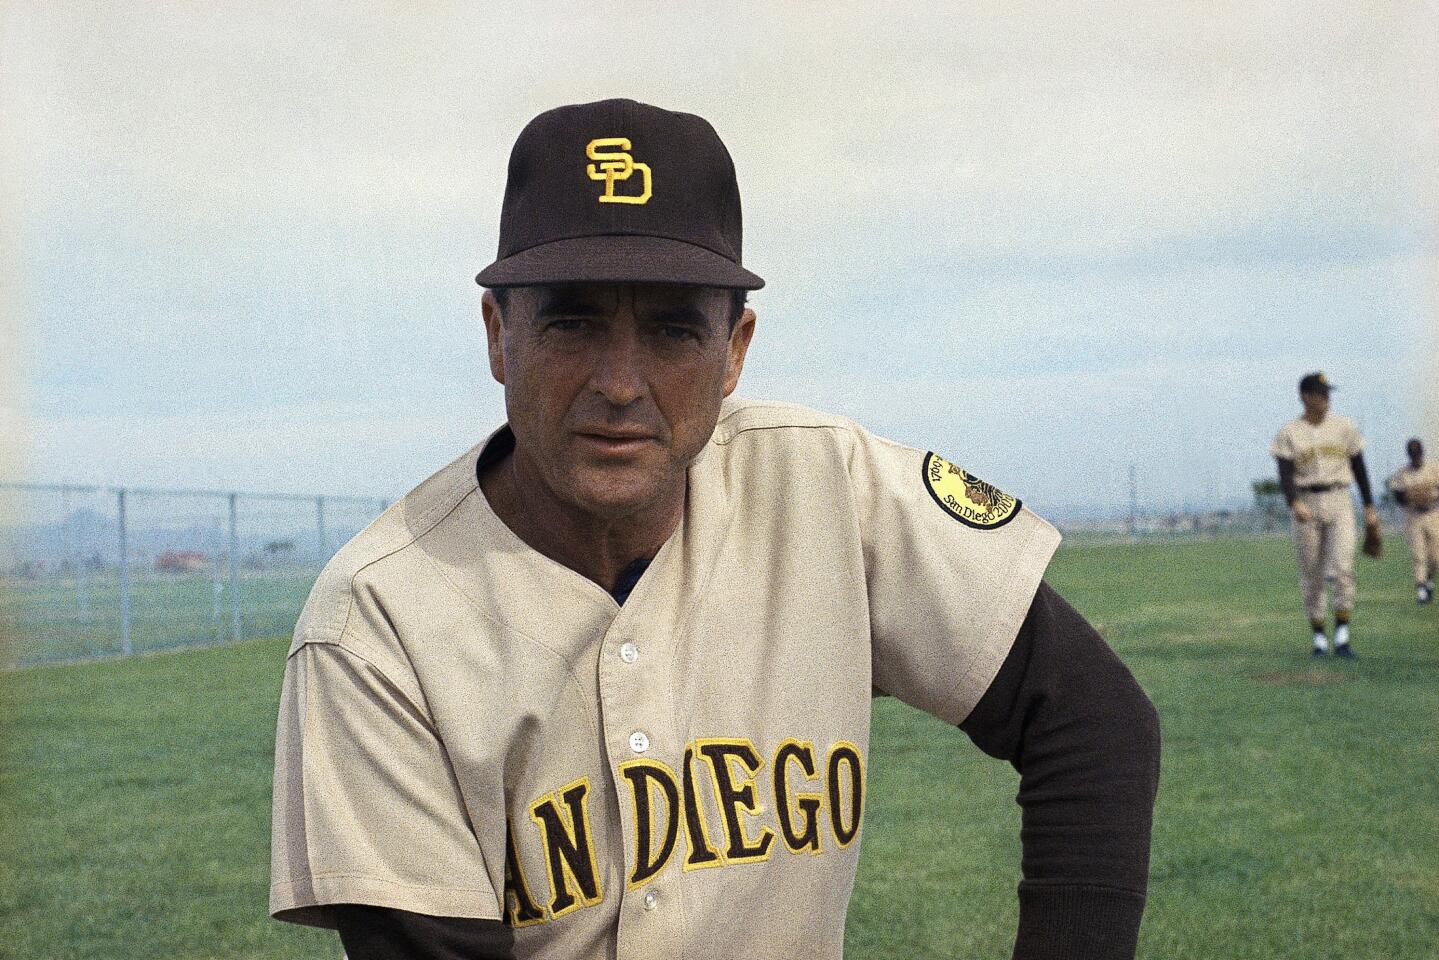 Blue replaced brown on Padres uniforms in 1991